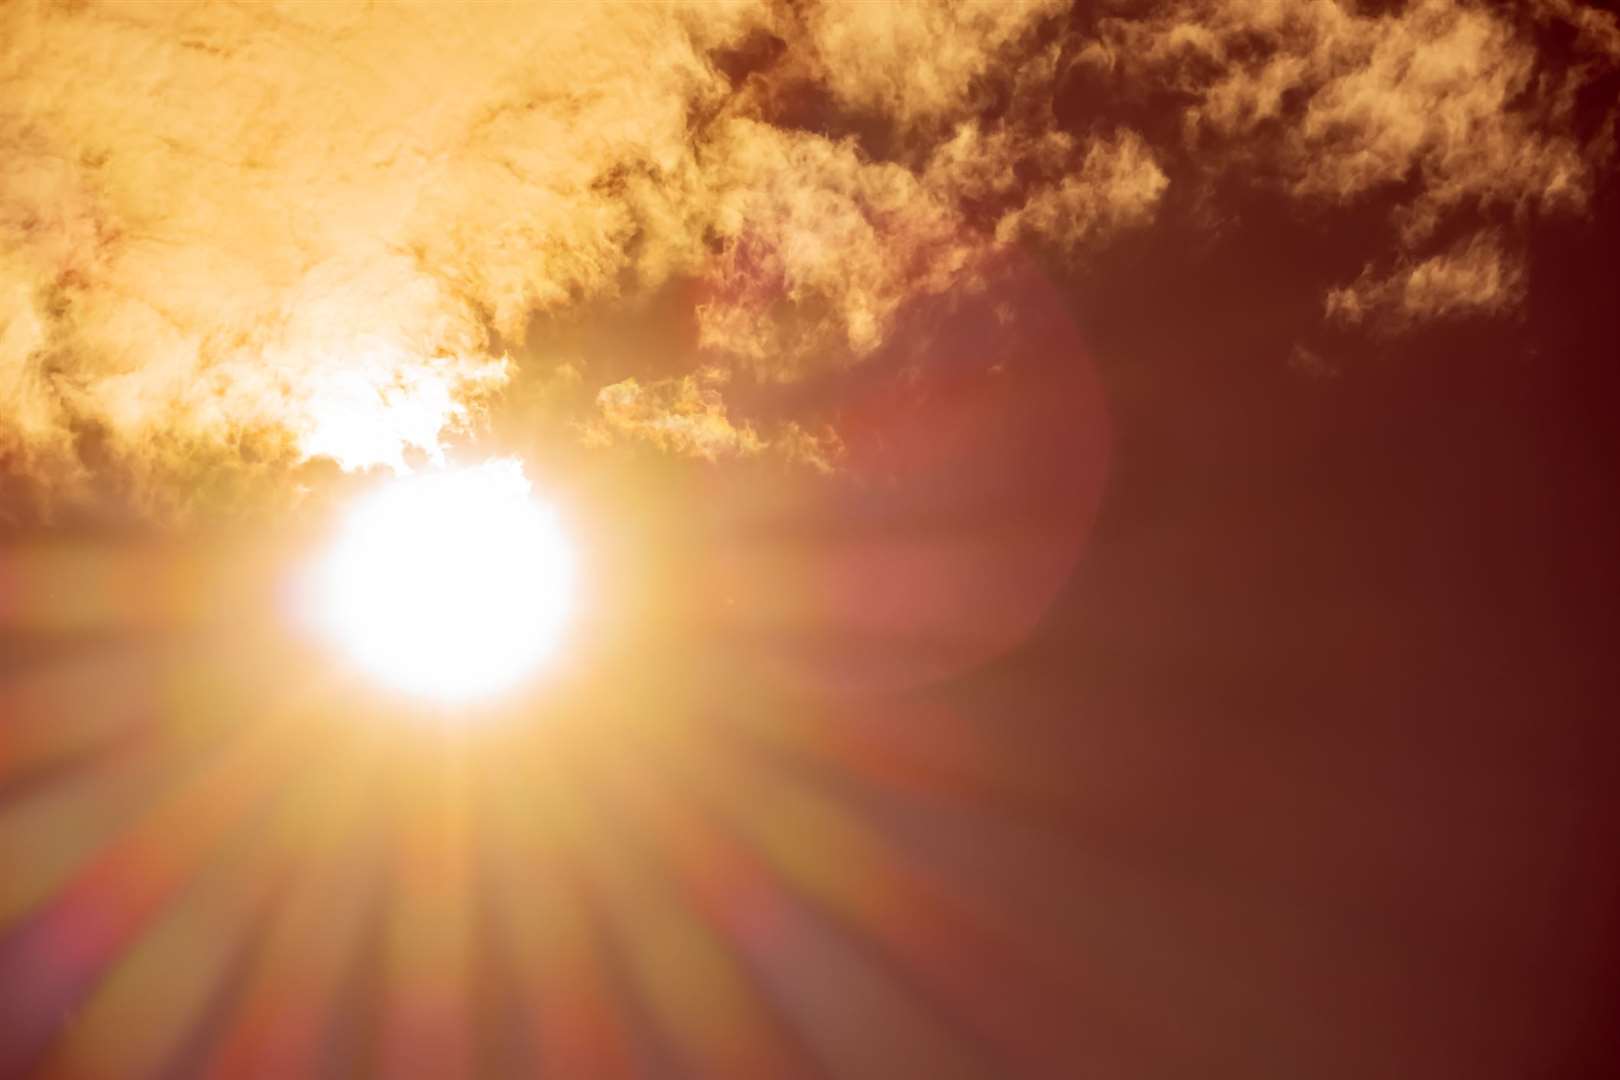 As the planet continues to heat up, heatwaves will become more common says meteorologists. Photo: iStock.